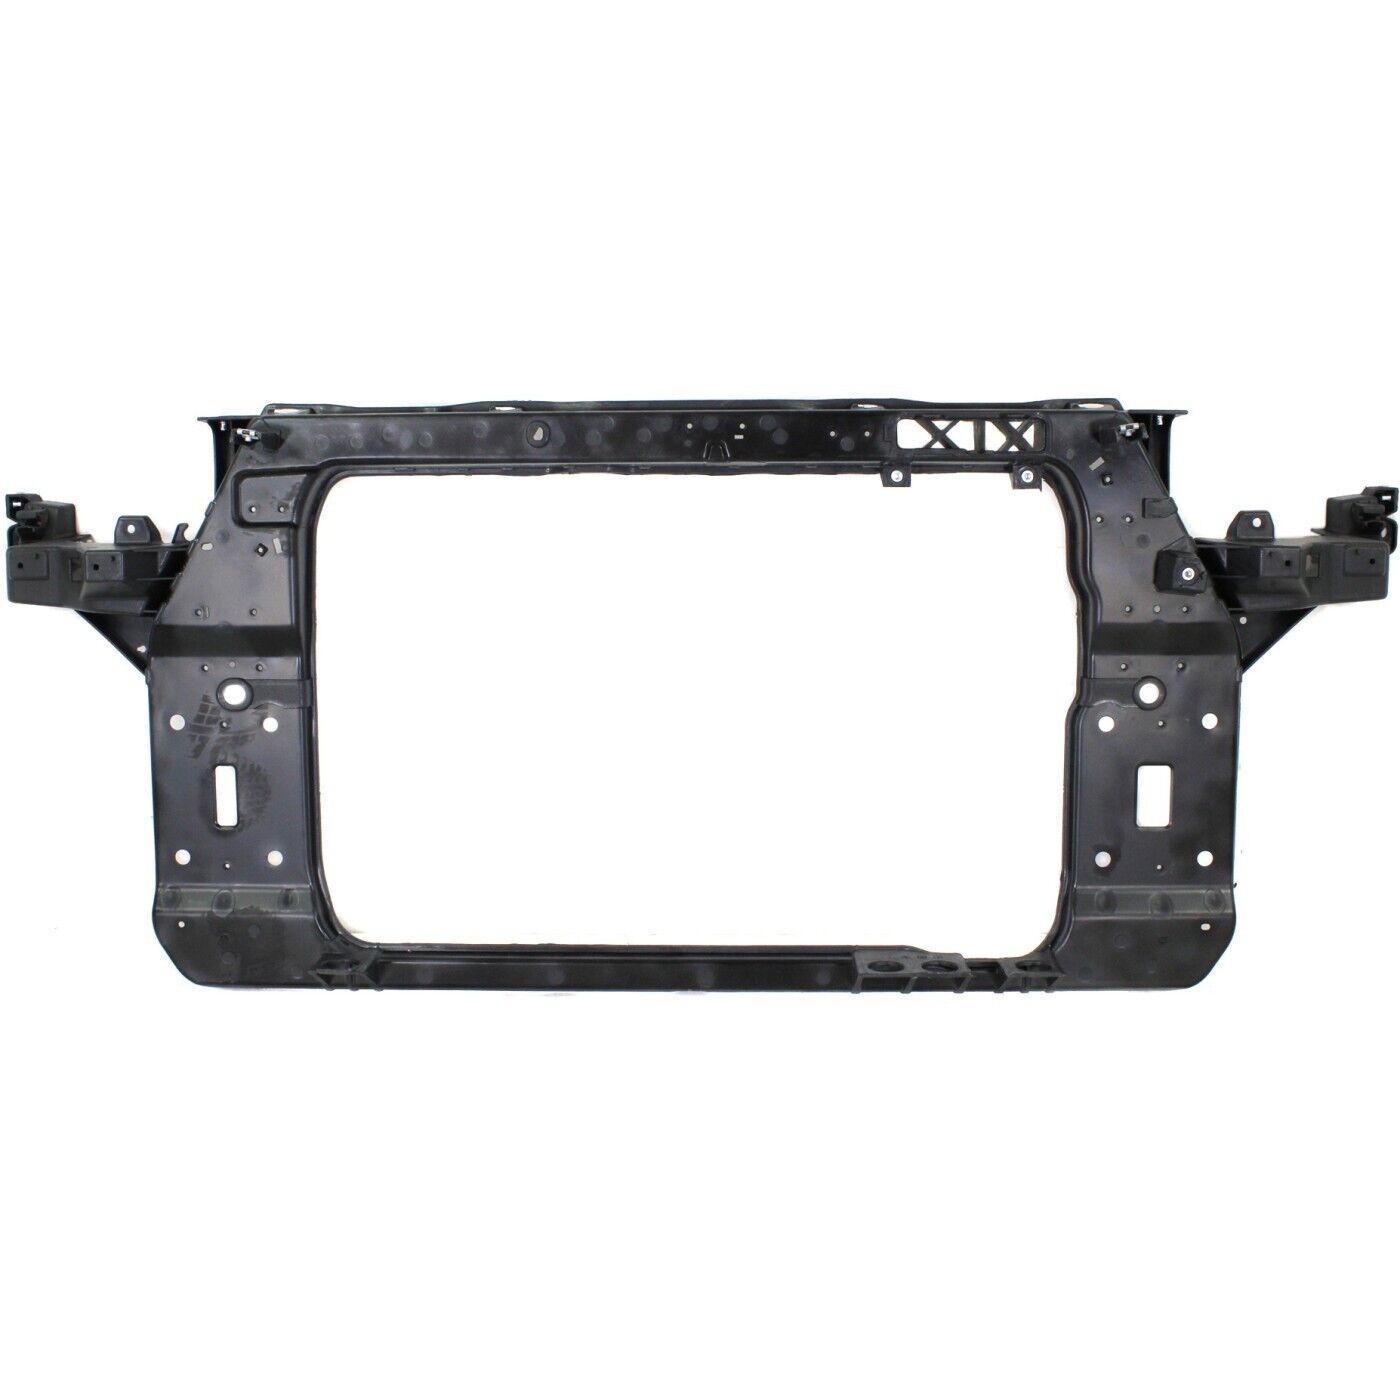 Radiator Support For 2010-2015 Hyundai Tucson Textured Assembly